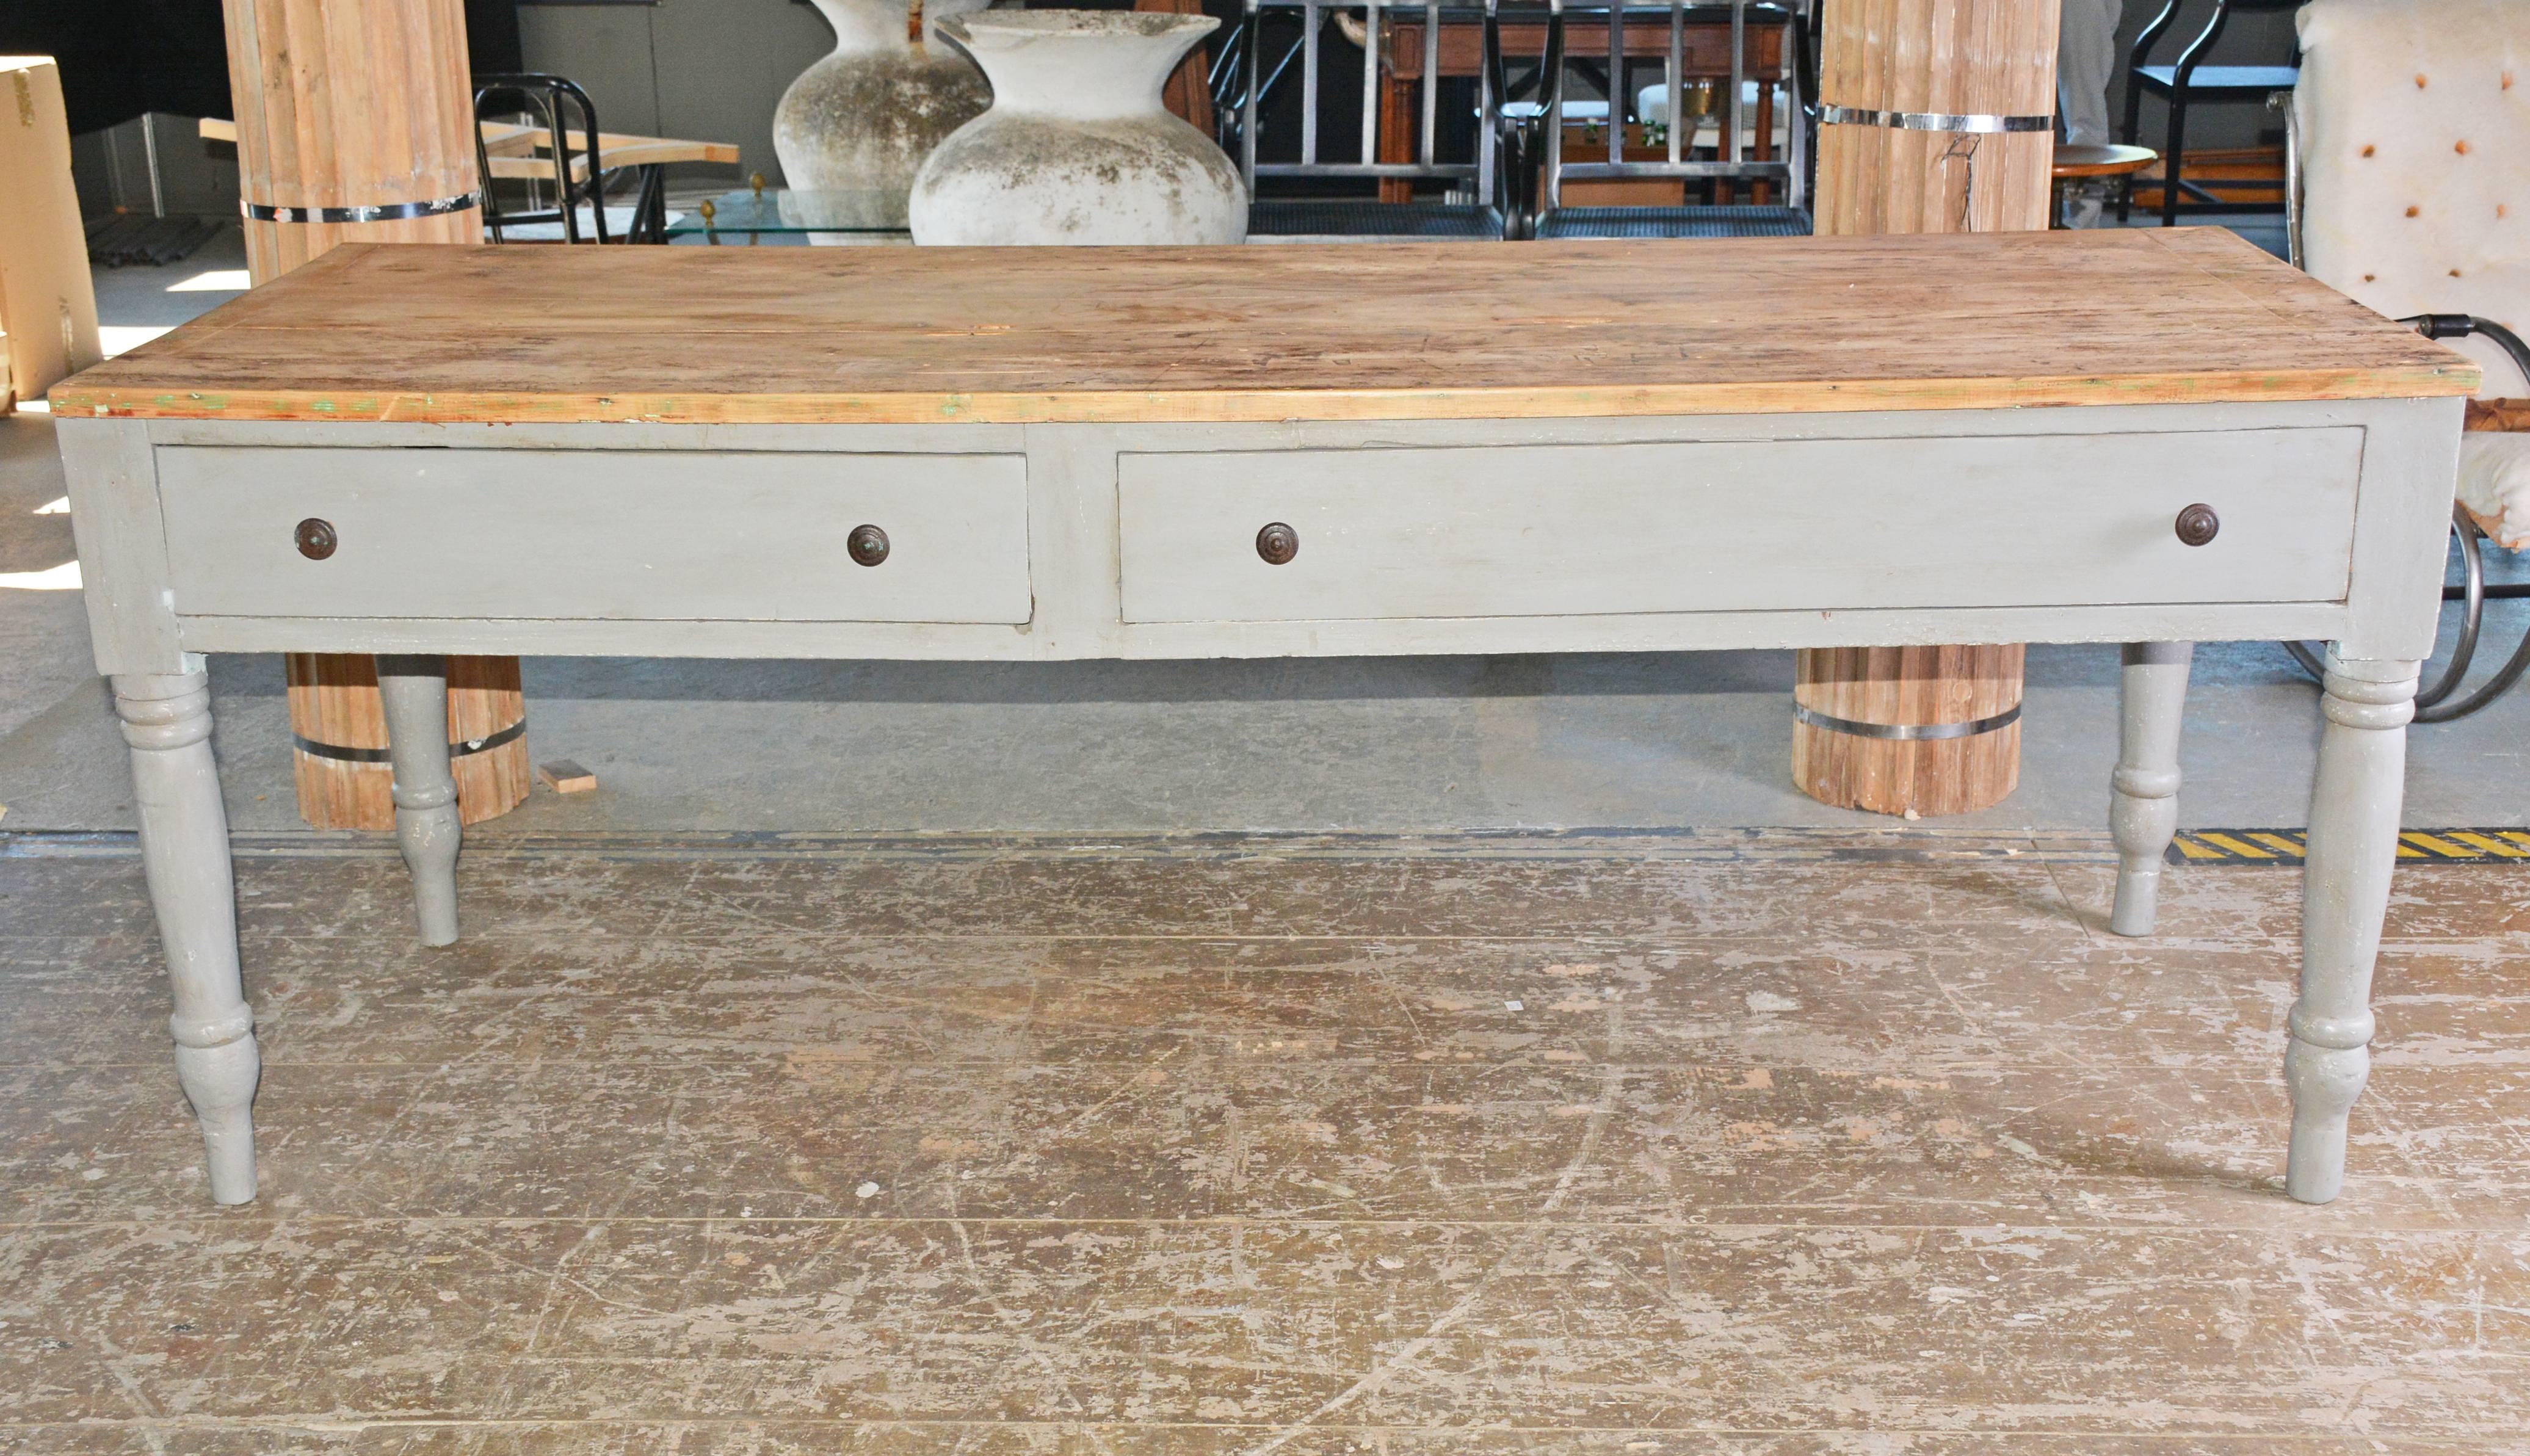 This country worktable kitchen counter can be used as a kitchen island, sideboard or a counter. Top has been stripped, leaving a great patina. Table has turned legs, two large drawers for storage. Finished in a French grey. Can work perfectly in a